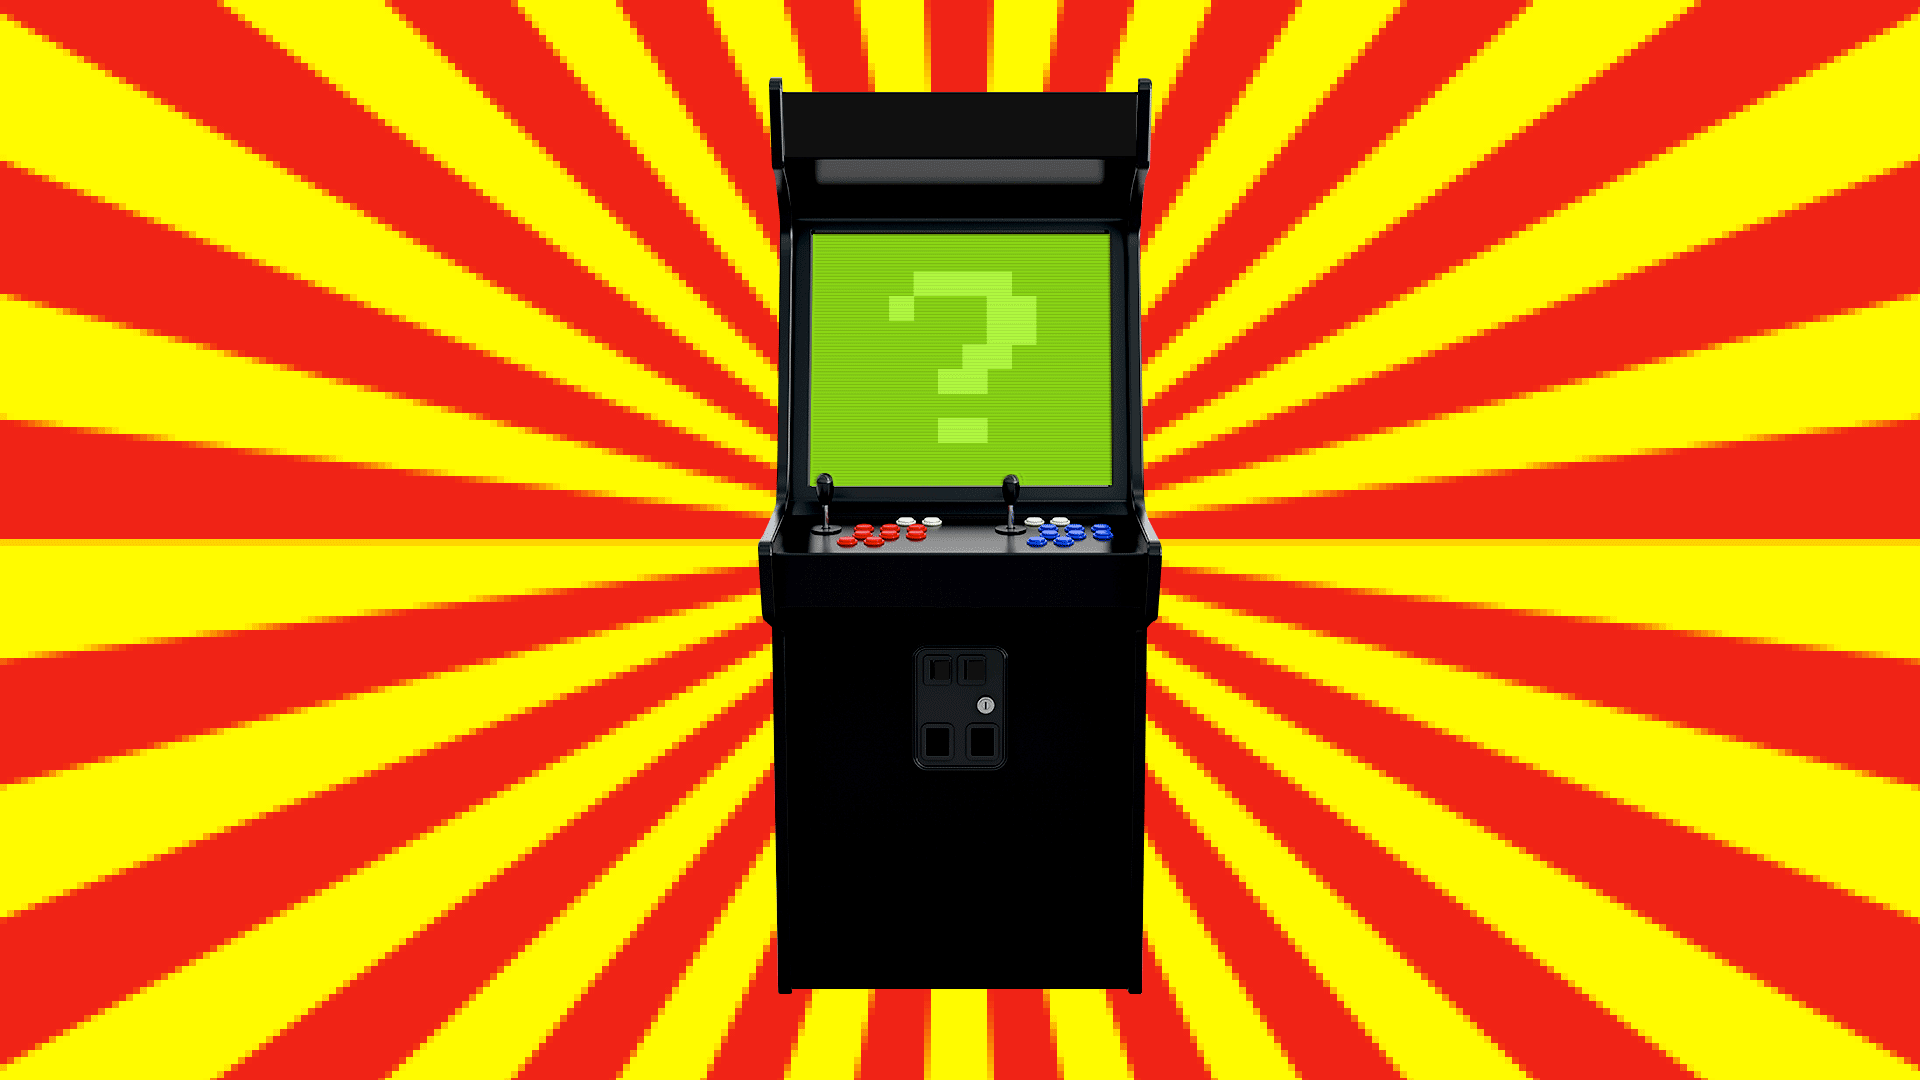 Animated illustration of an arcade cabinet with a flashing question mark on the screen.